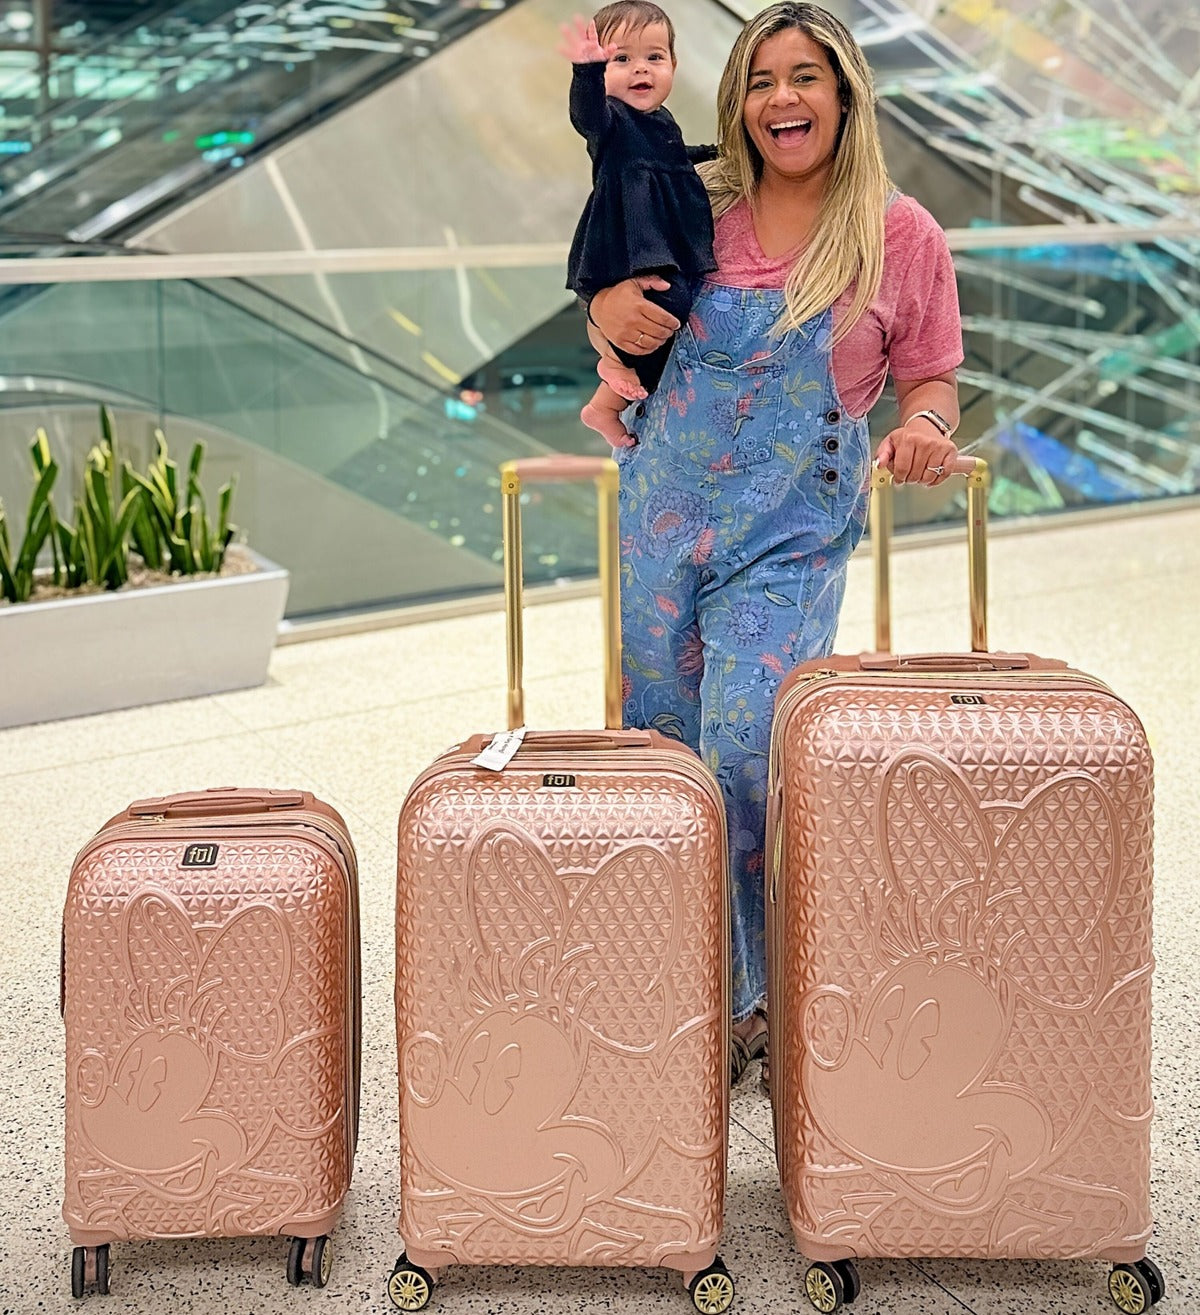 Ful Disney Minnie Mouse rolling luggage 3 piece set rose gold - best traveling suitcase sets